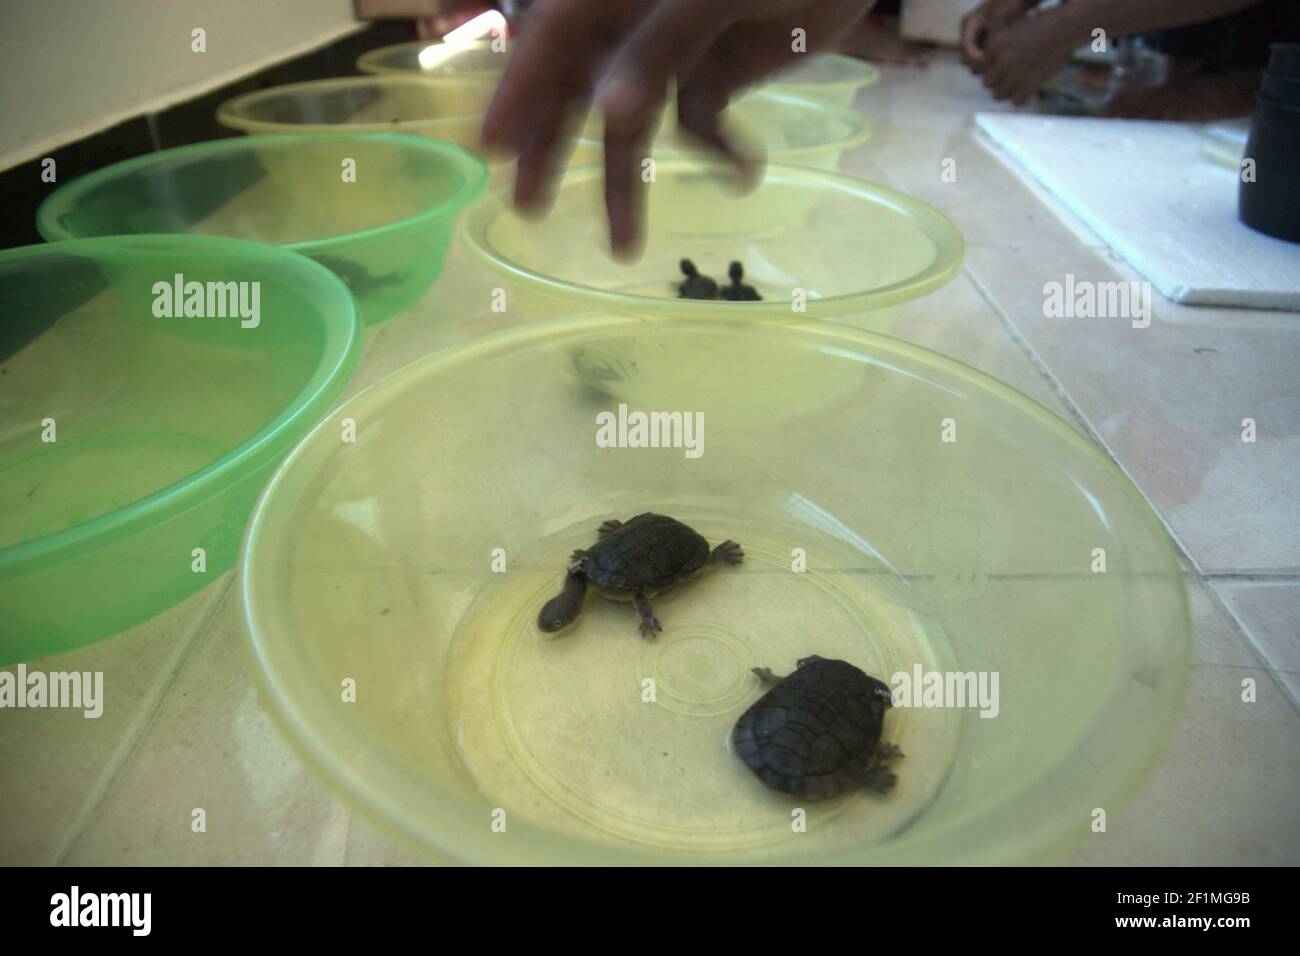 Rote Island, Indonesia. July 15, 2009. Worker of a company that is an official breeder of Rote Island's snake-necked turtles (Chelodina mccordi) placing the endemic turtles into plastic bowls for conditioning phase. Bred in captivity, the turtles will be released to the wild, to one of the suitable habitats which is Lake Peto in Maubesi village, on a ceremonial event that will be attended by Indonesian officials on July 16, 2009. Indonesian officials, official breeders, and NGOs conduct the release program as one of the conservation efforts to save the critically endangered species. Stock Photo